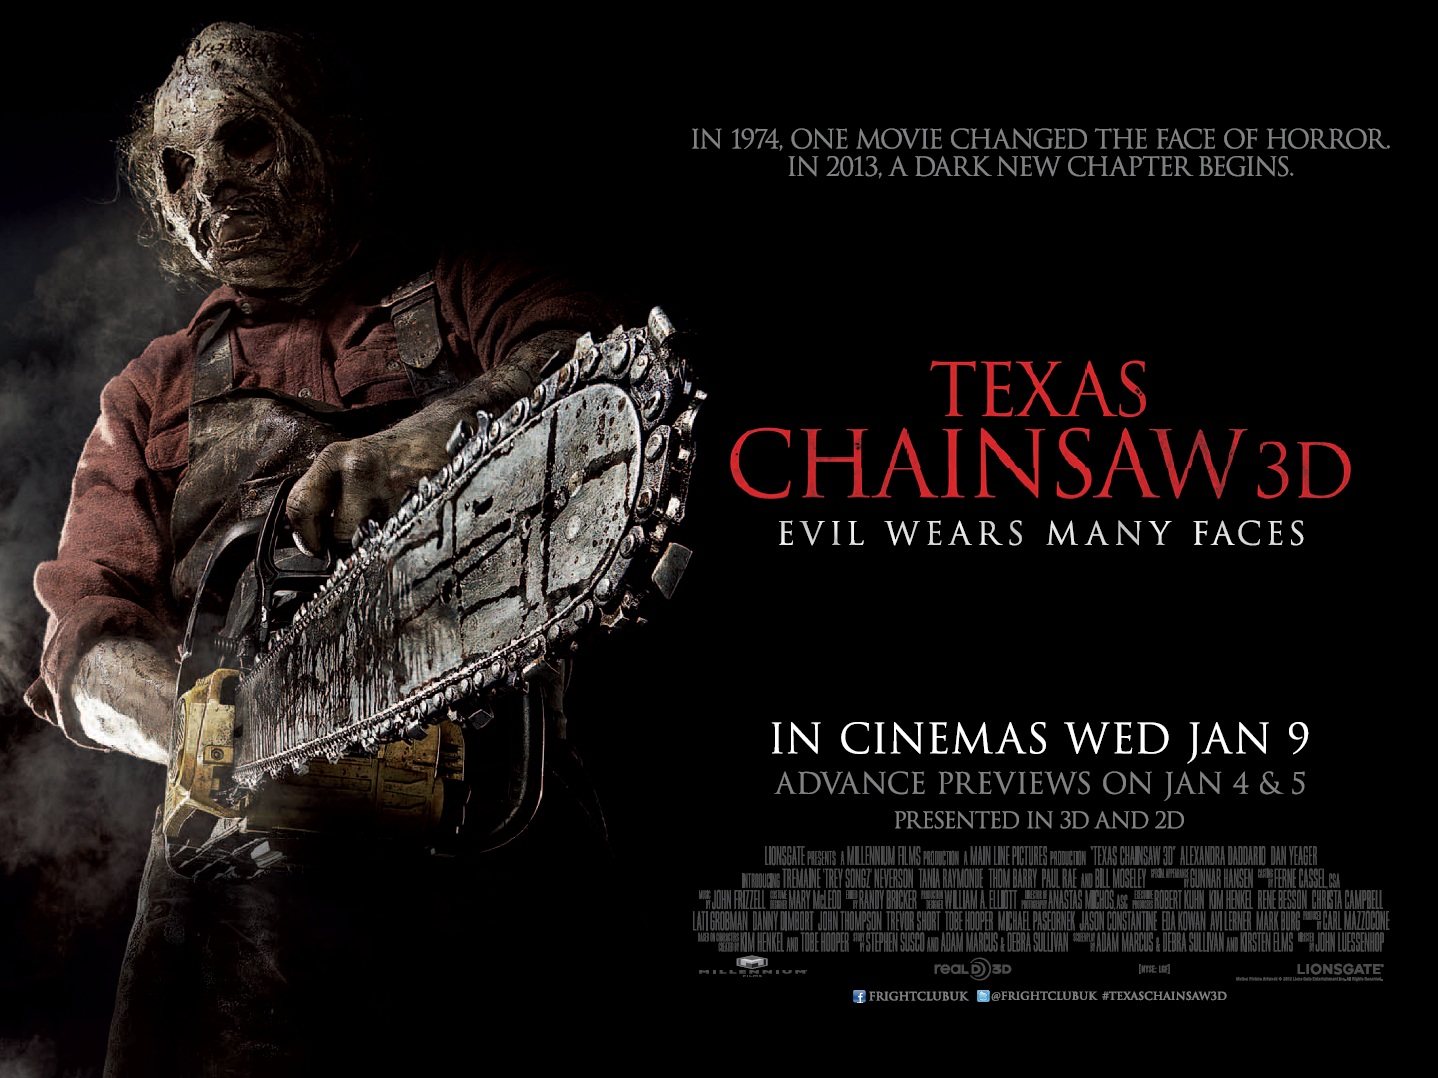 Texas-Chainsaw-3D-UK-Quad-Poster